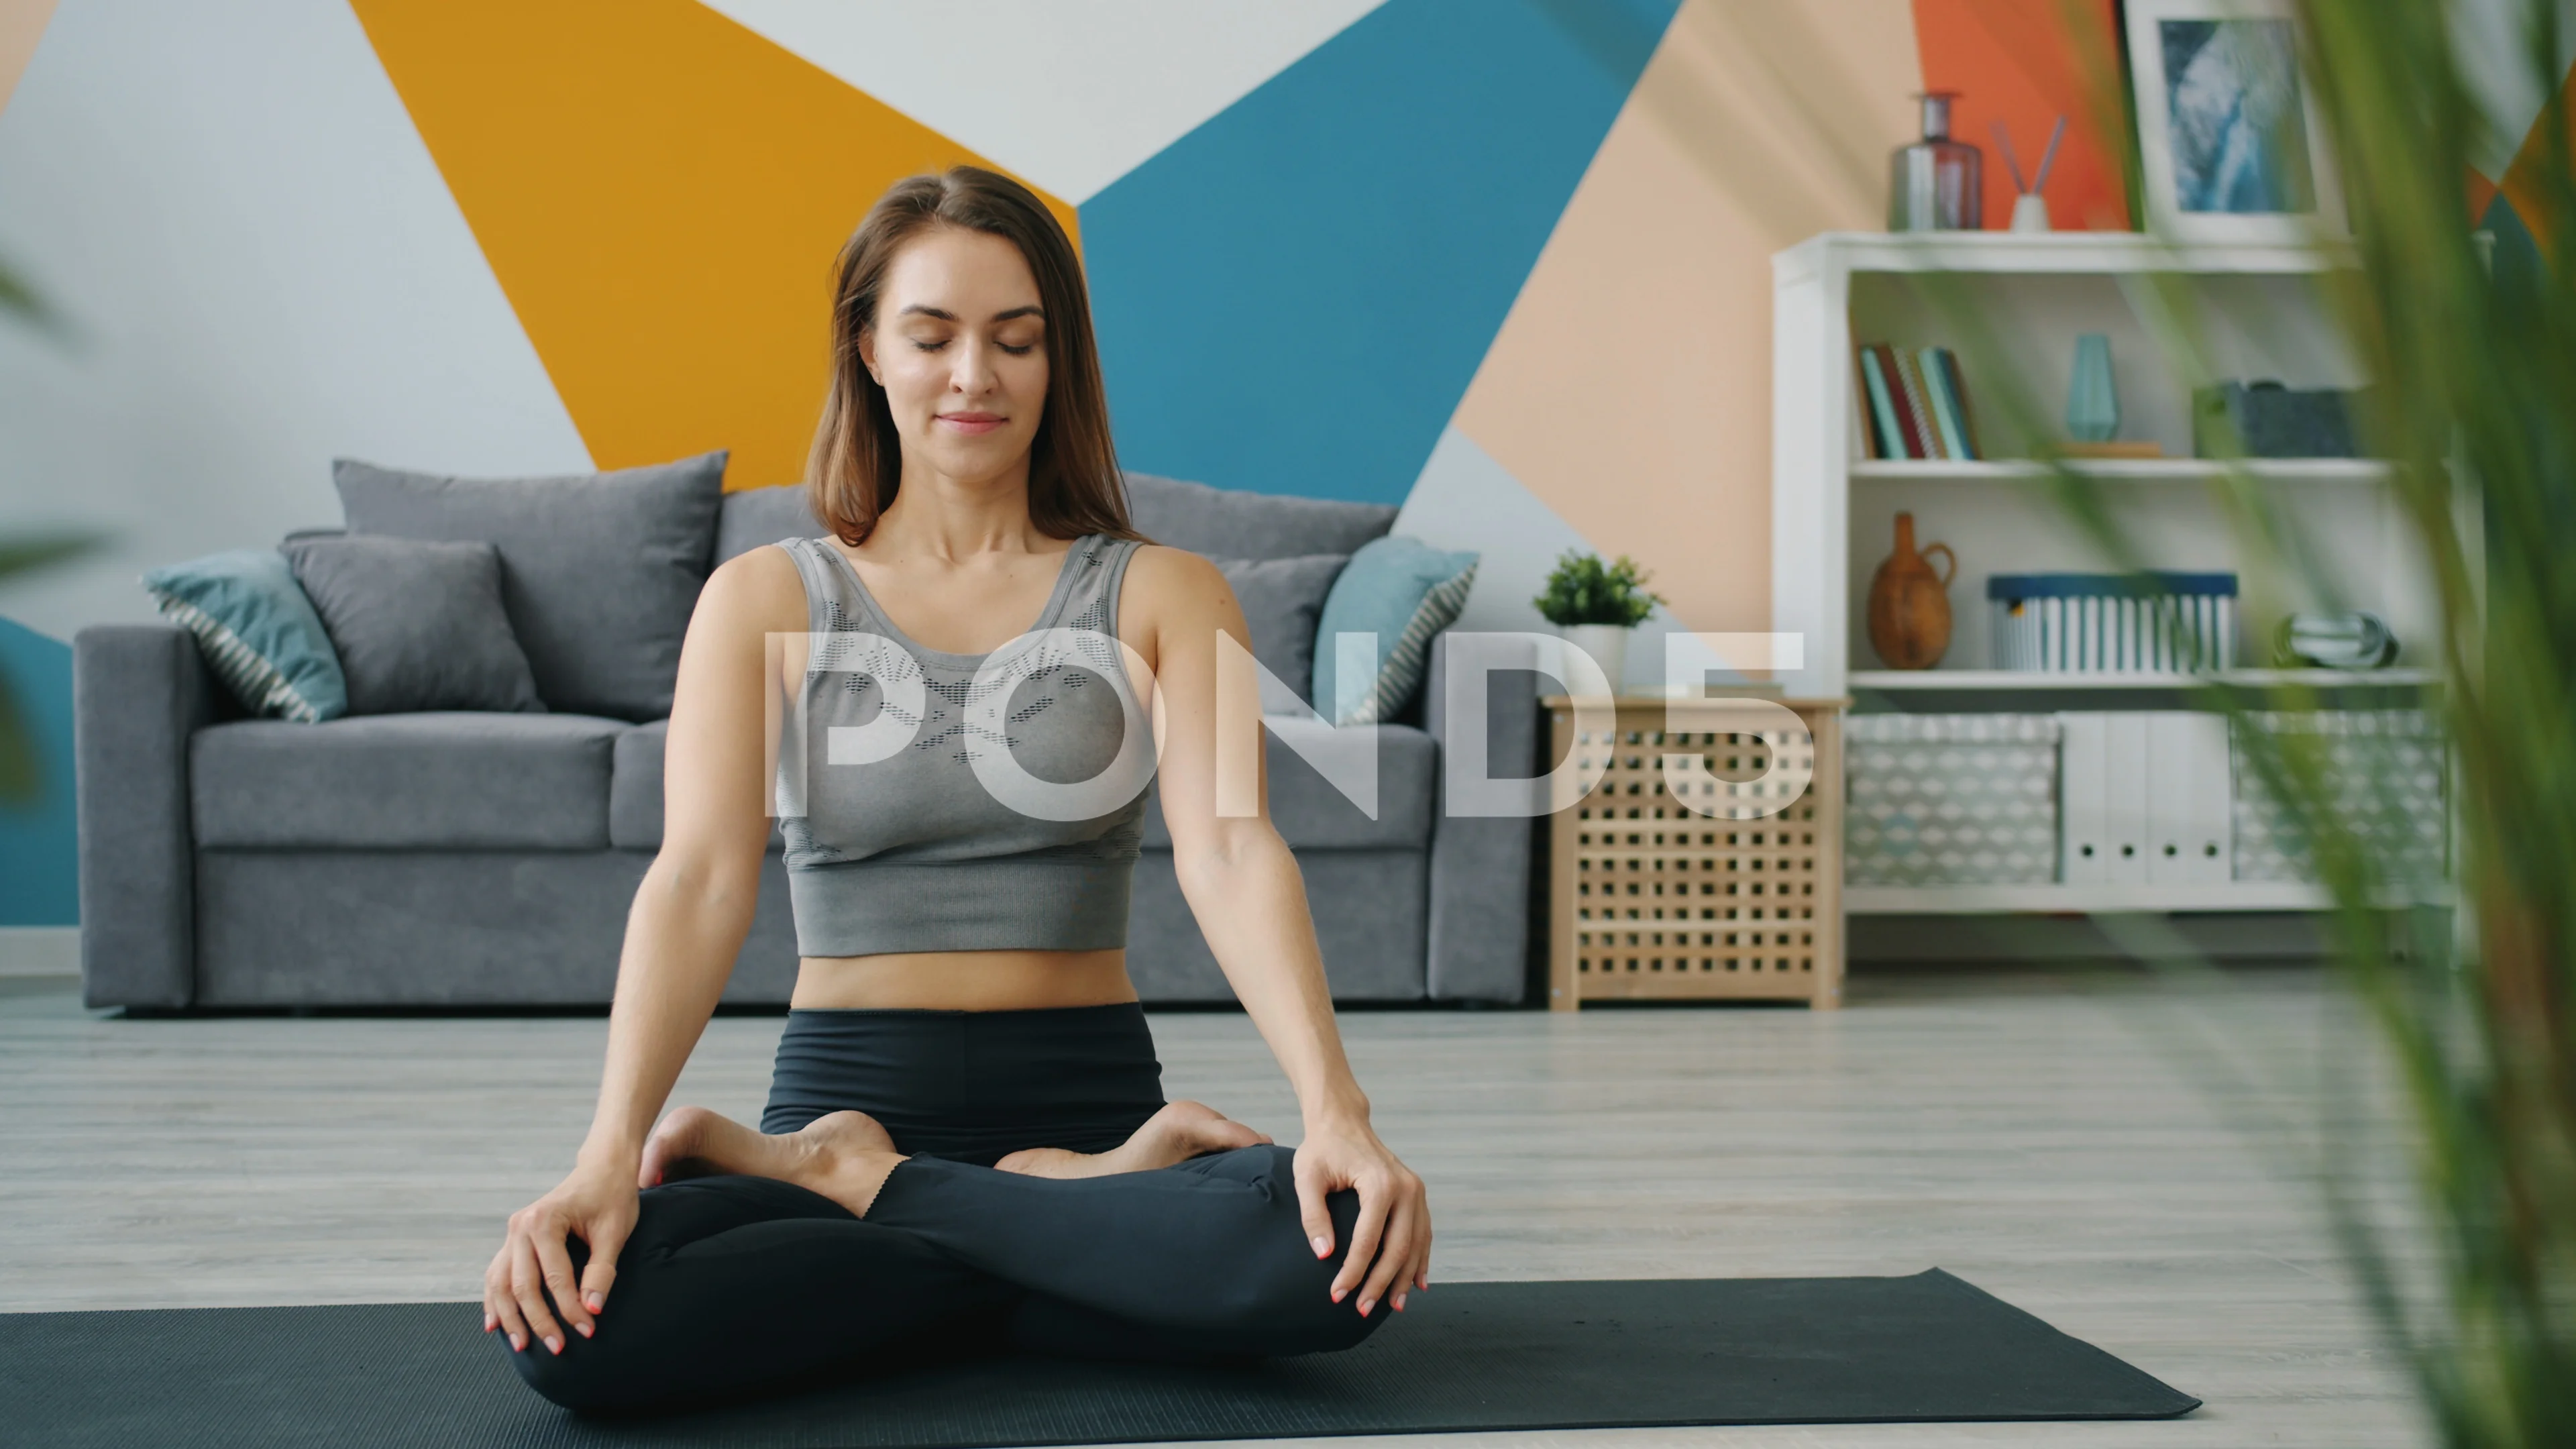 Woman Doing Yoga Meditating in Full Lotus Pose with Hands in Namaste in  Studio Stock Image - Image of posture, health: 91133125